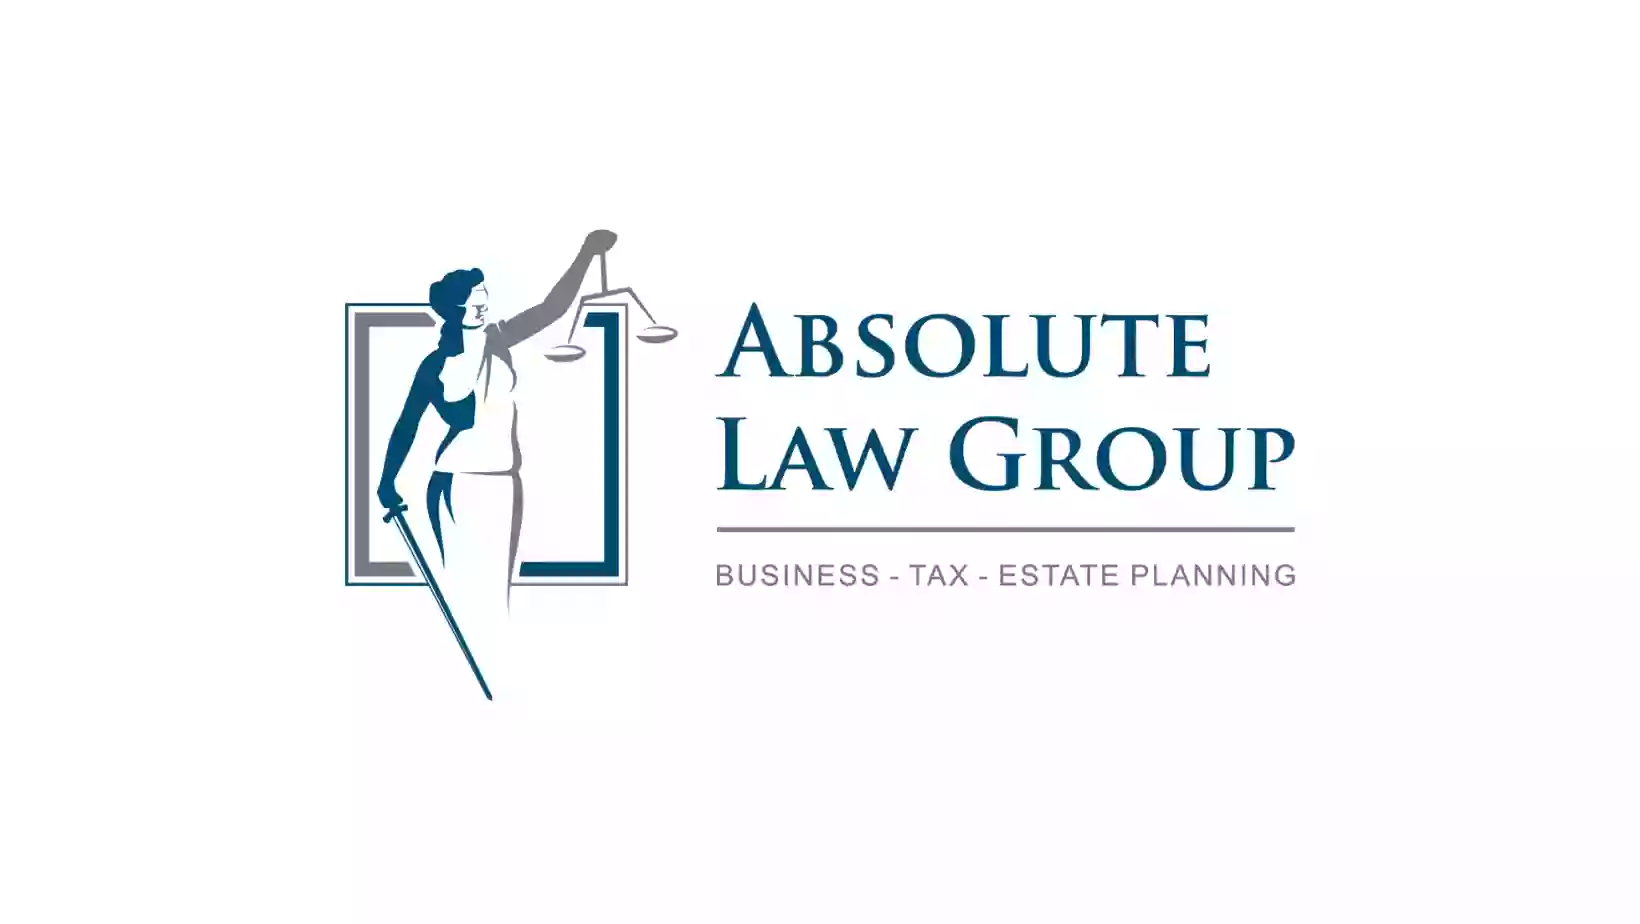 Absolute Law Group